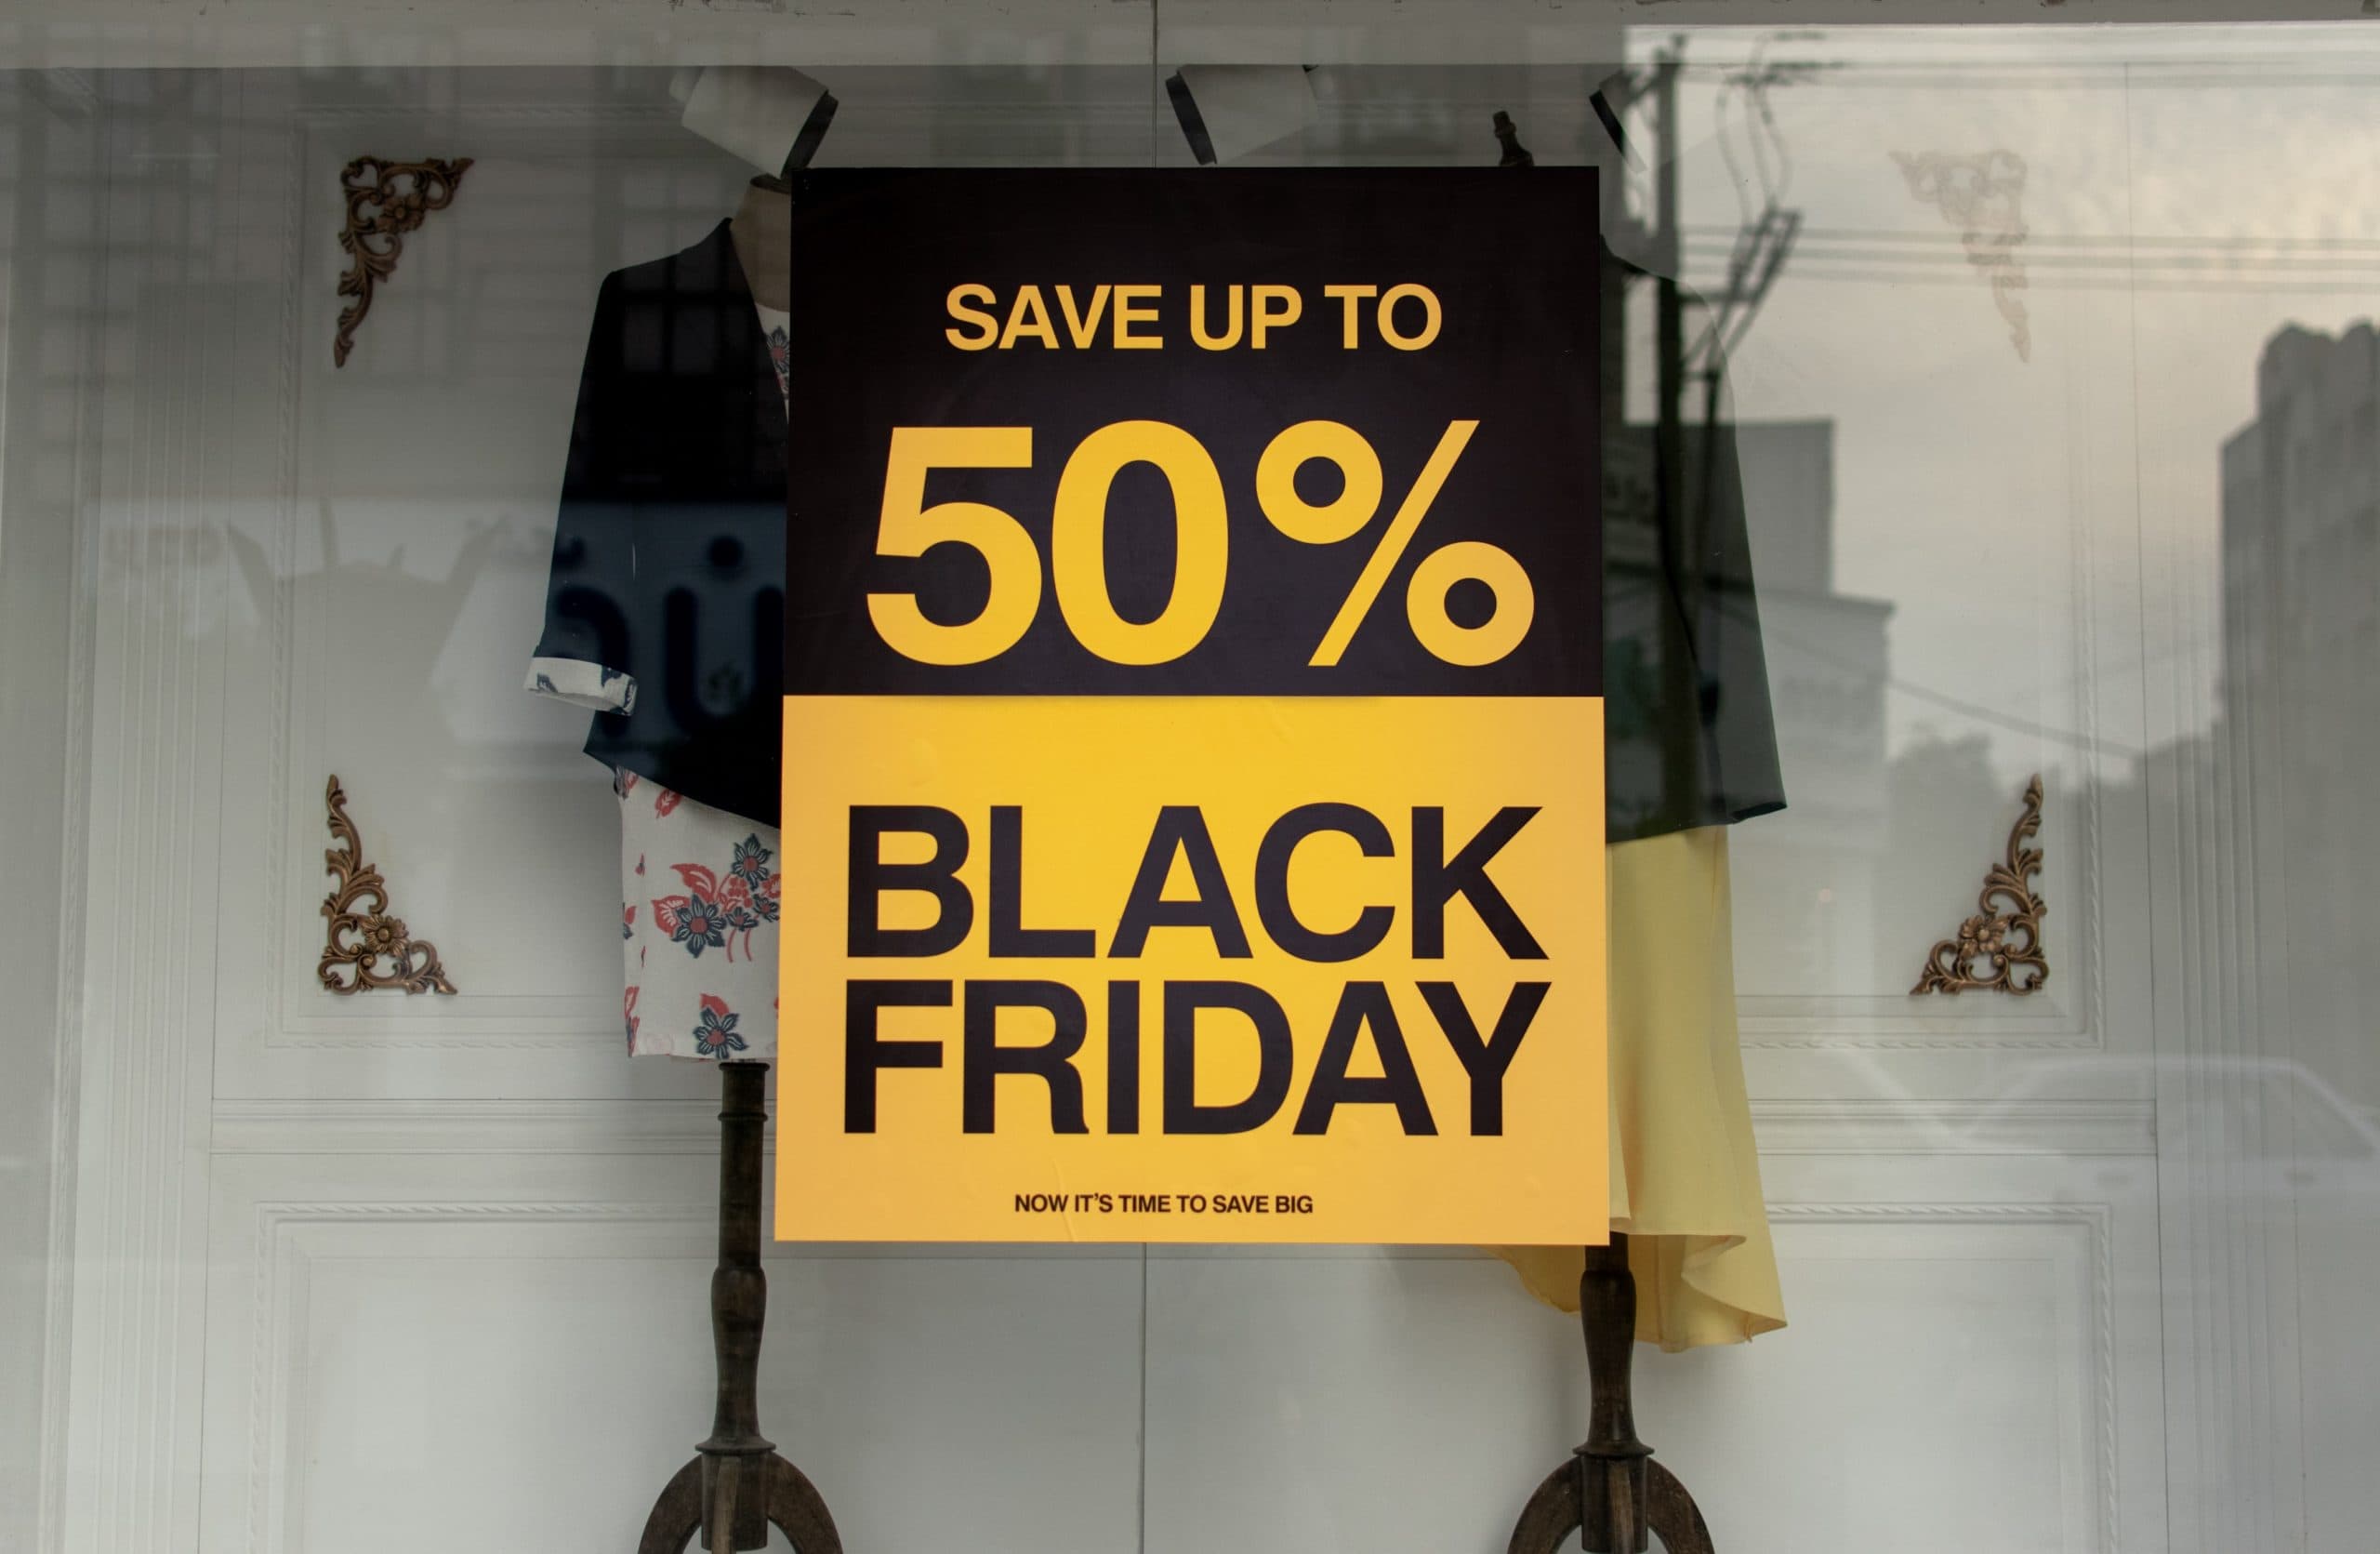 How to Create an Effective Black Friday Sales Plan